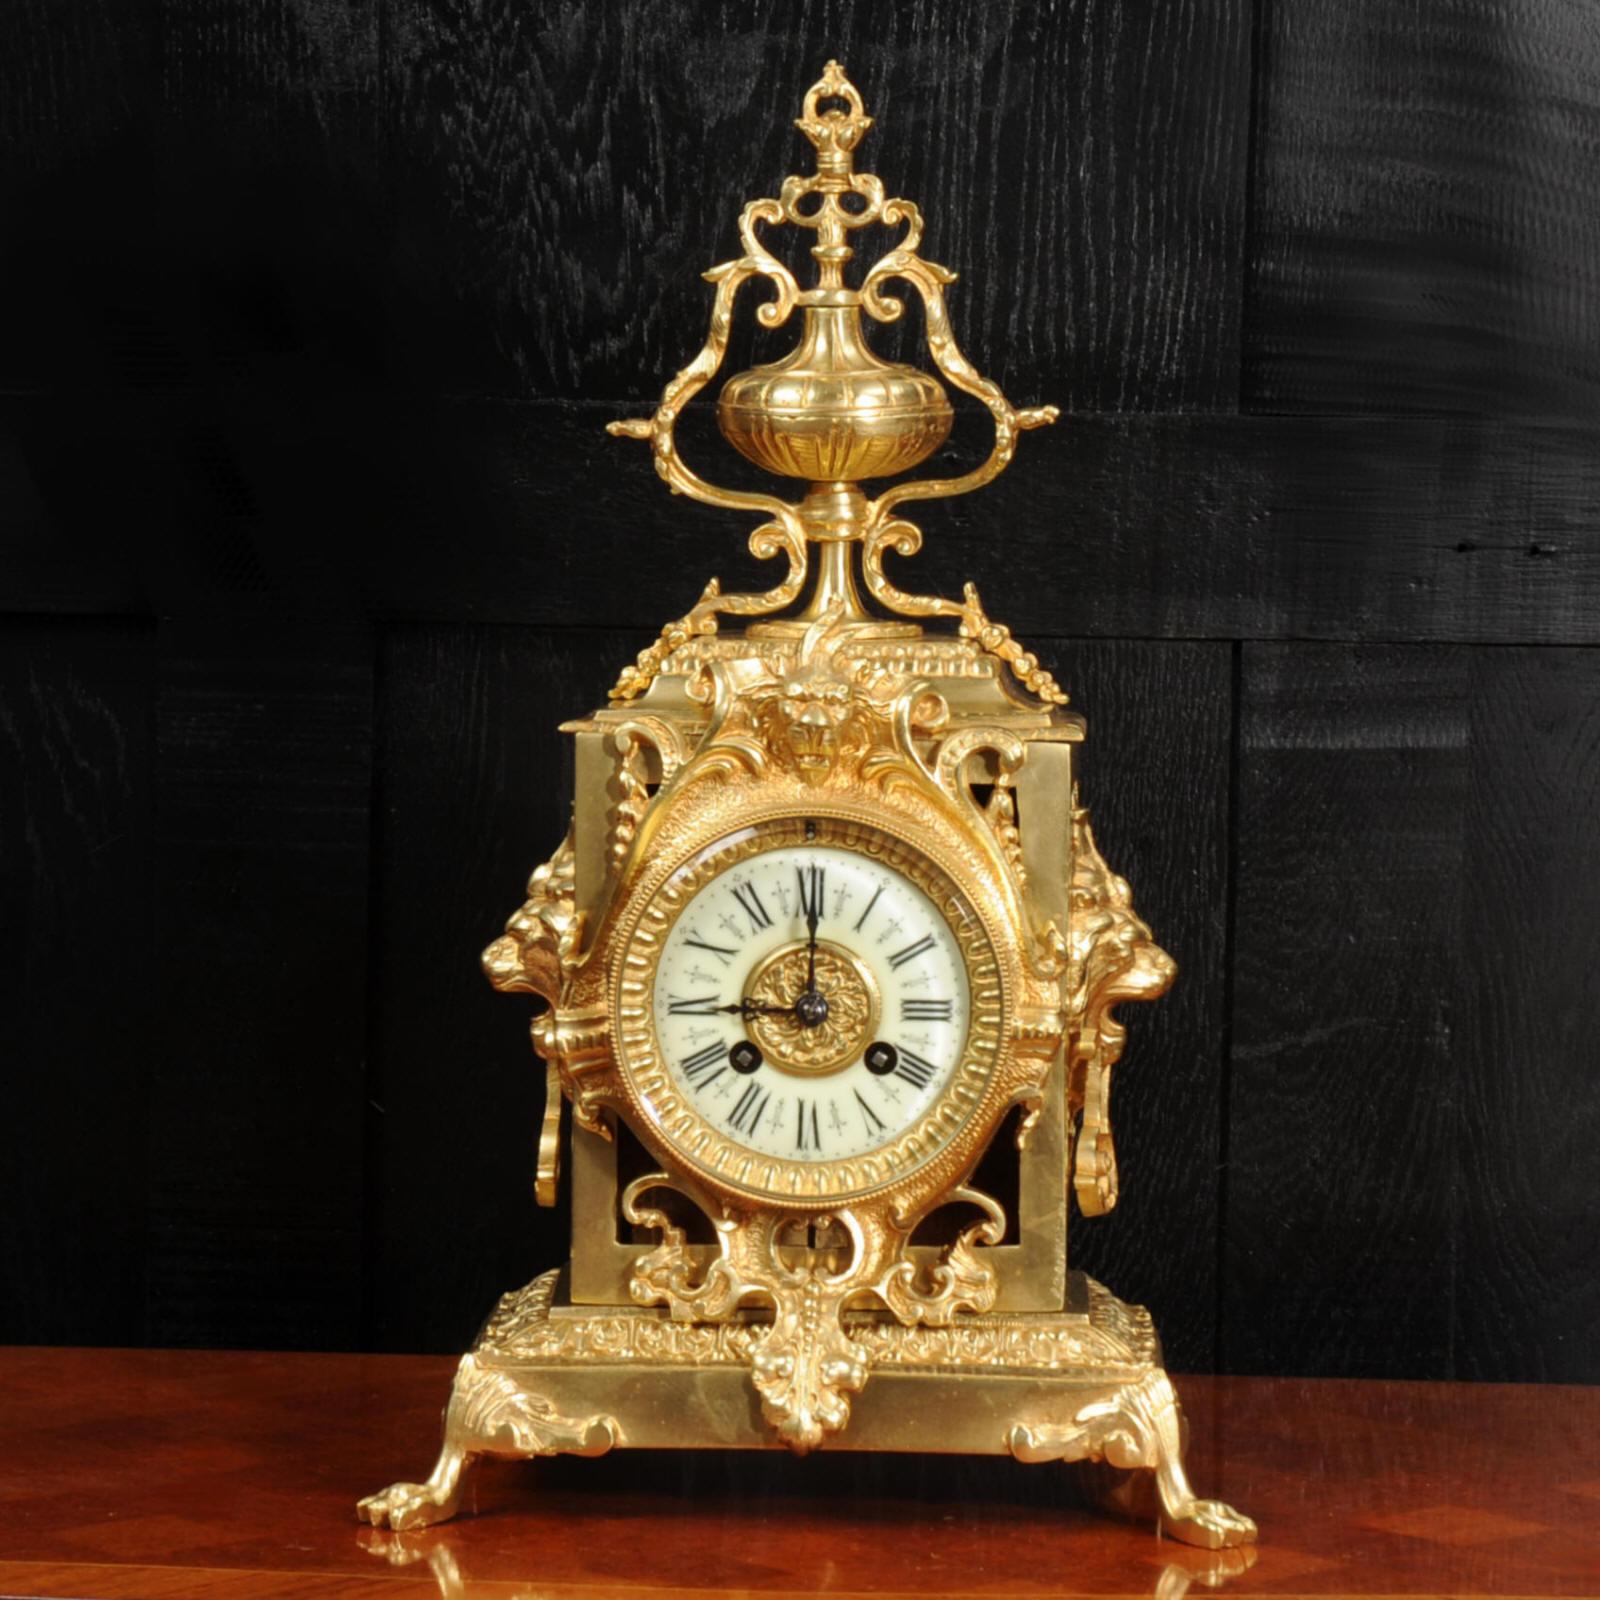 A stunning antique French Baroque clock. It is beautifully made in gilt bronze and features large lions masks to the sides and it sits on hairy paw feet. The front is pieced to allow a glimpse of the pendulum gently swinging within the case.

The